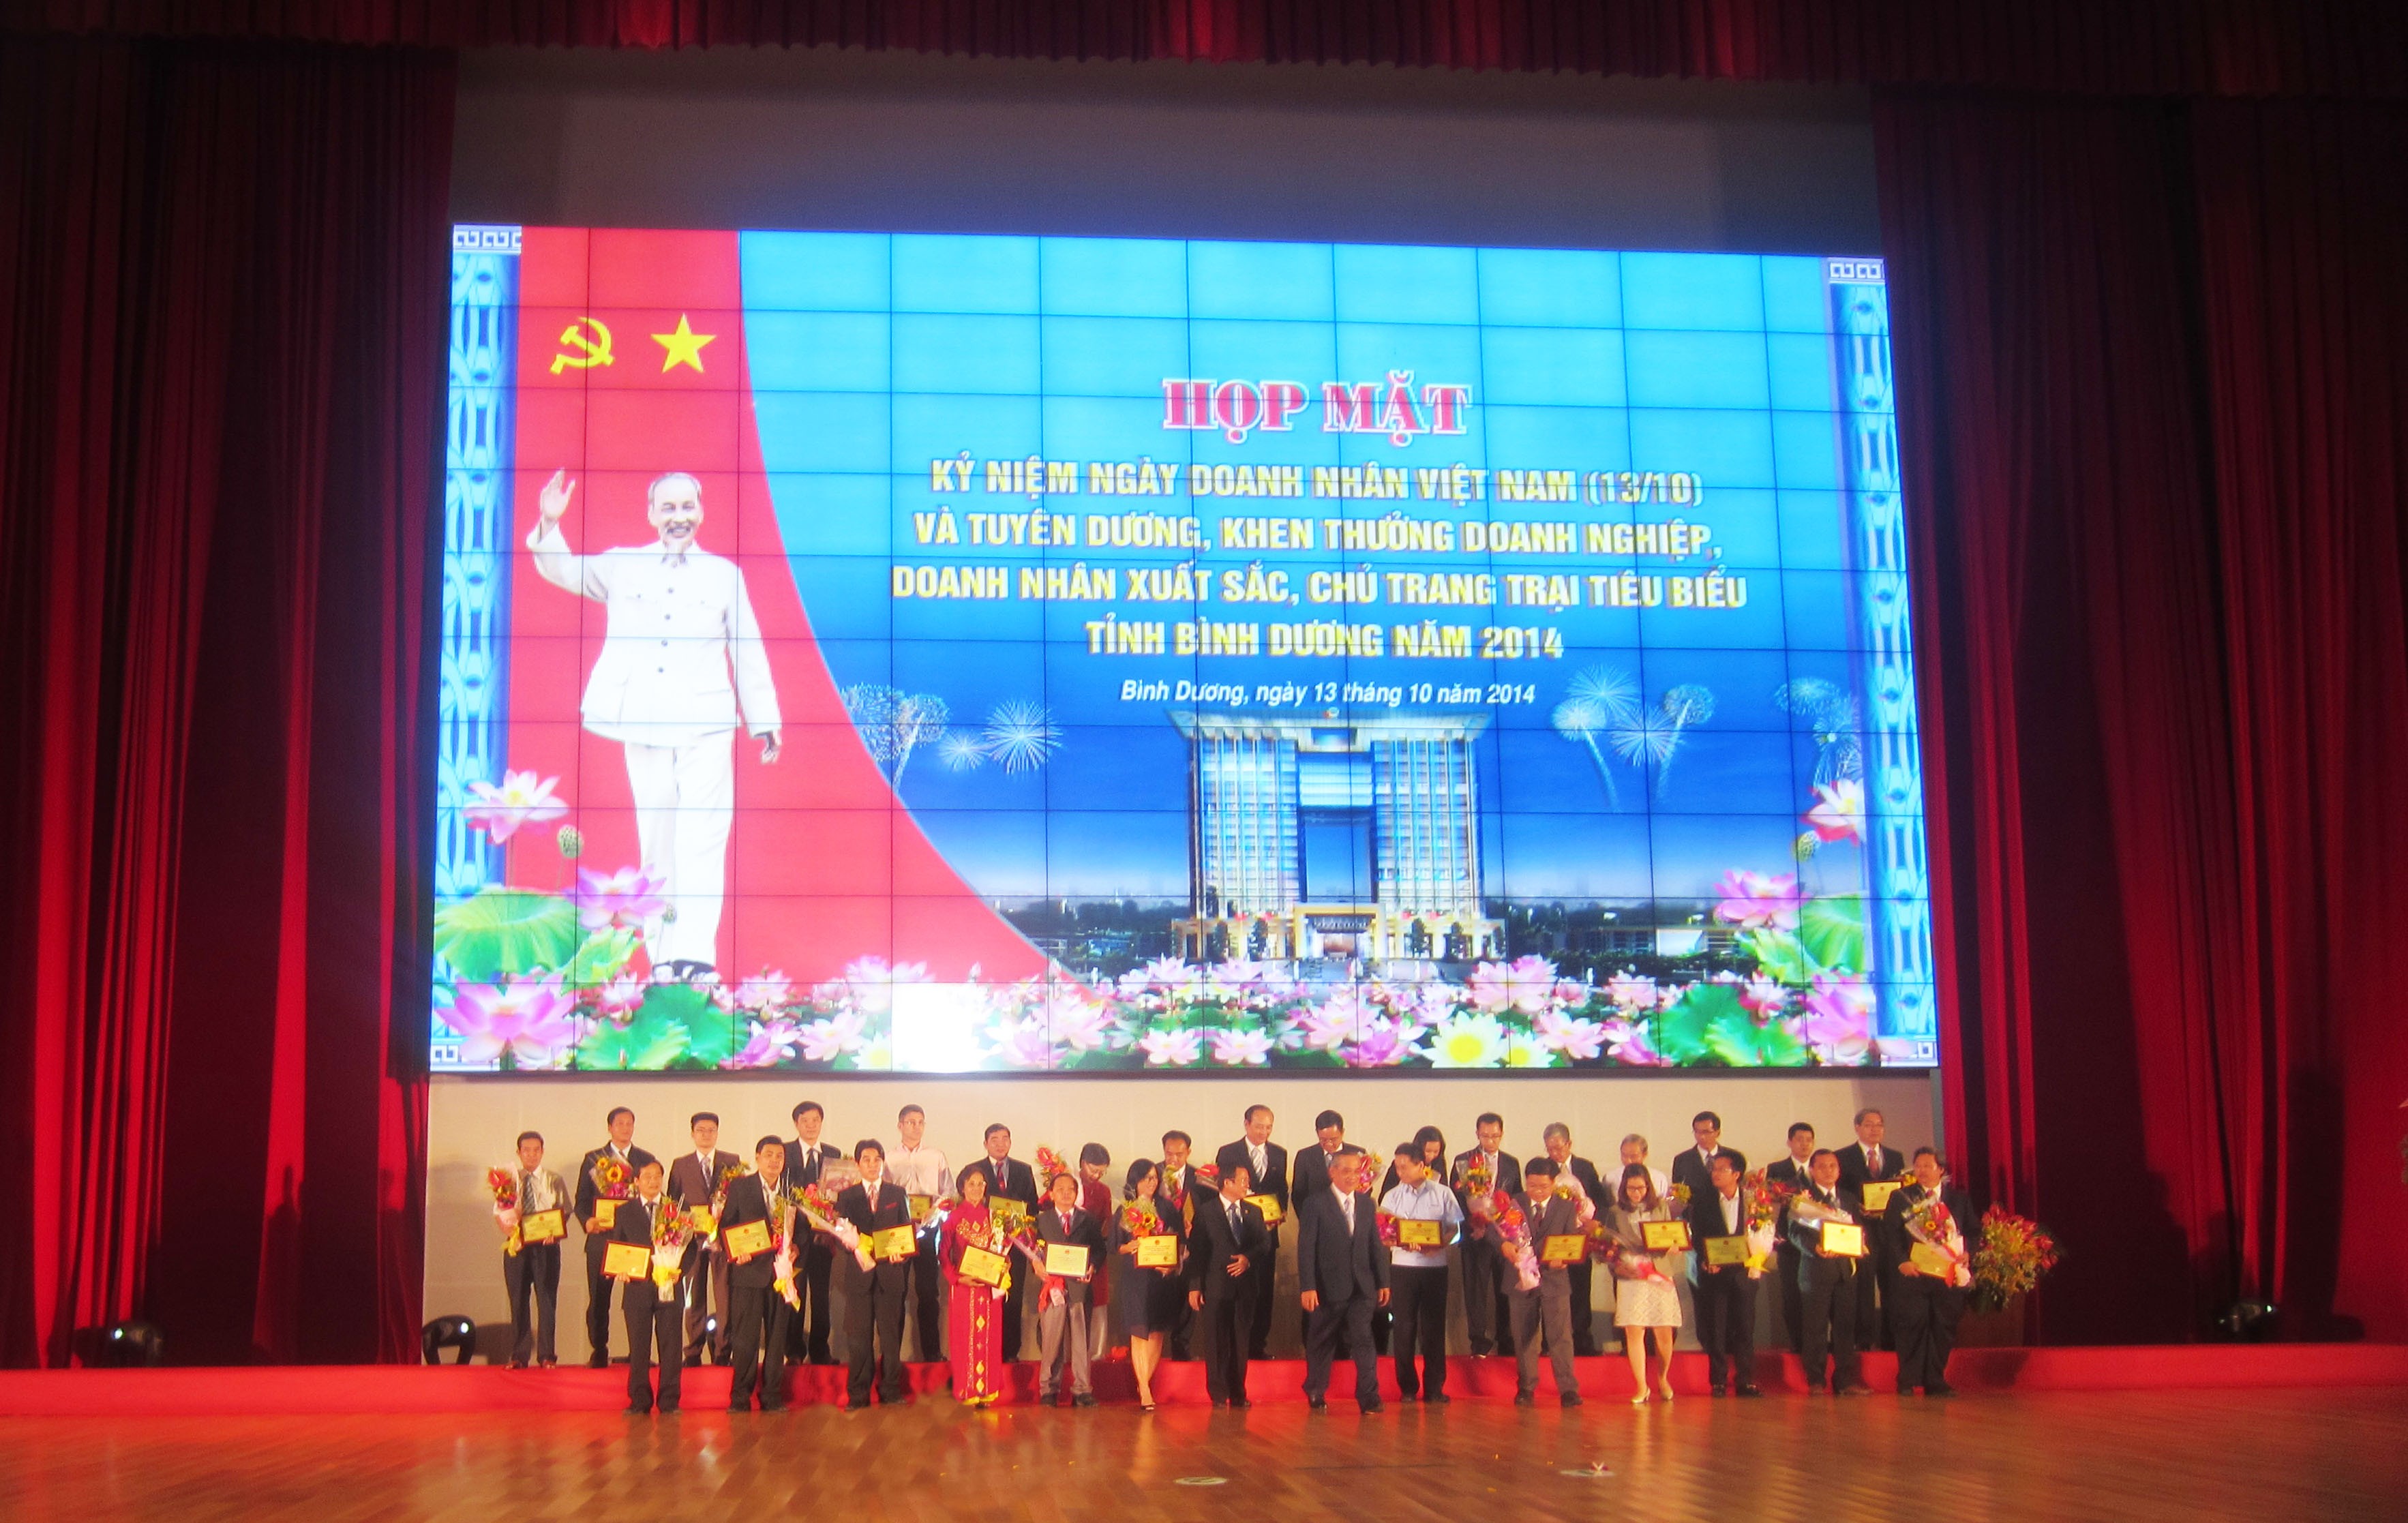 GSV ACHIEVED “THE TYPICAL ENTERPRISE OF BINH DUONG PROVINCE 2014”